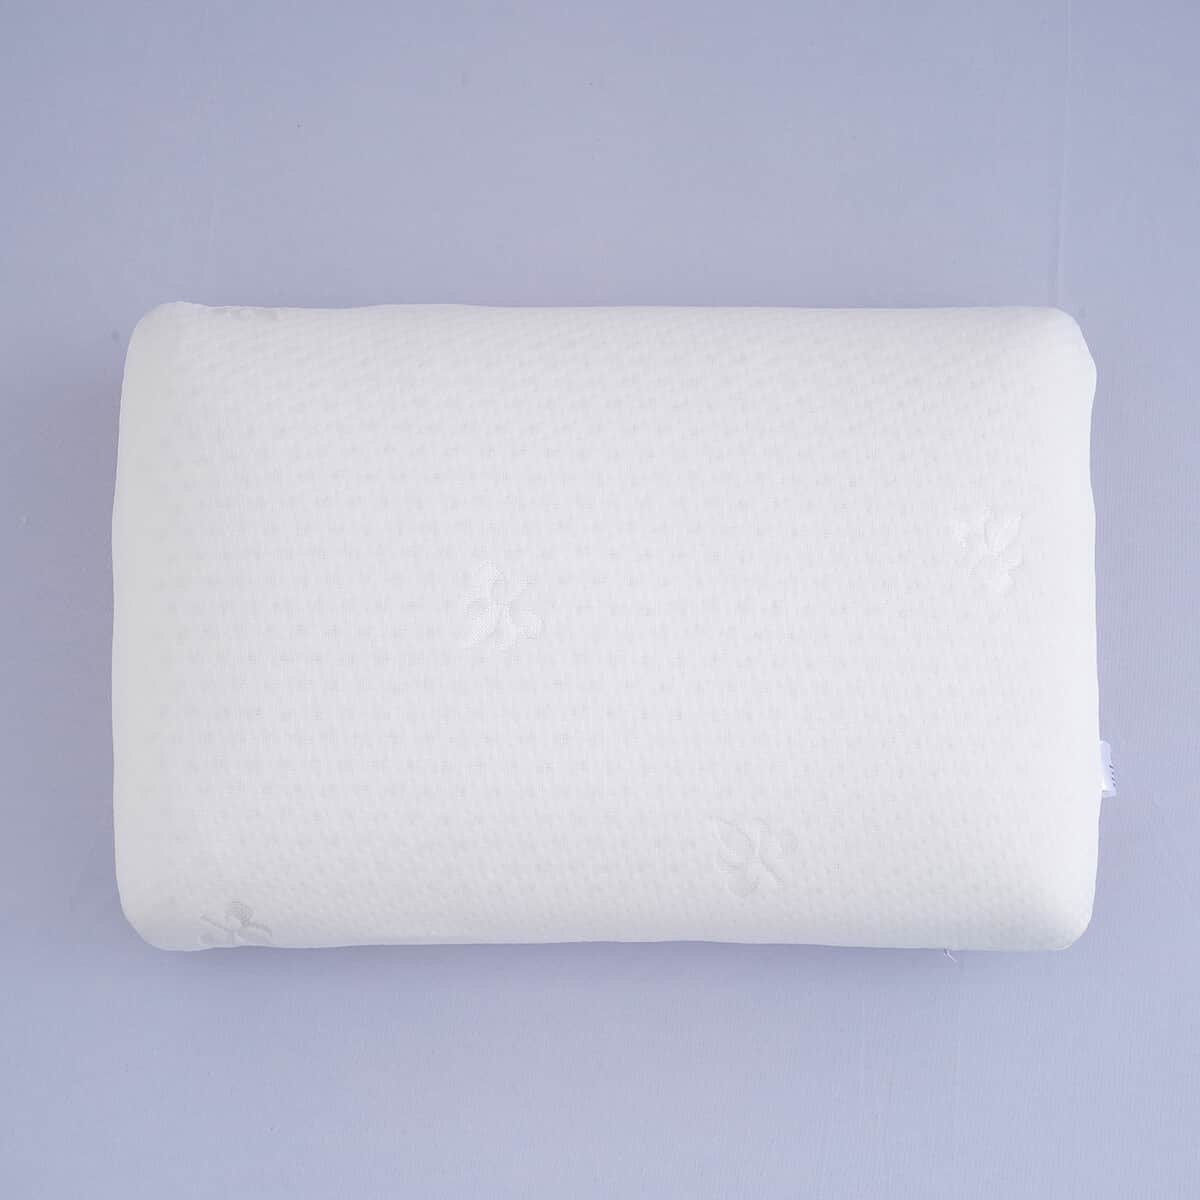 Homesmart Double Layer Covered Natural Latex Pillow image number 0